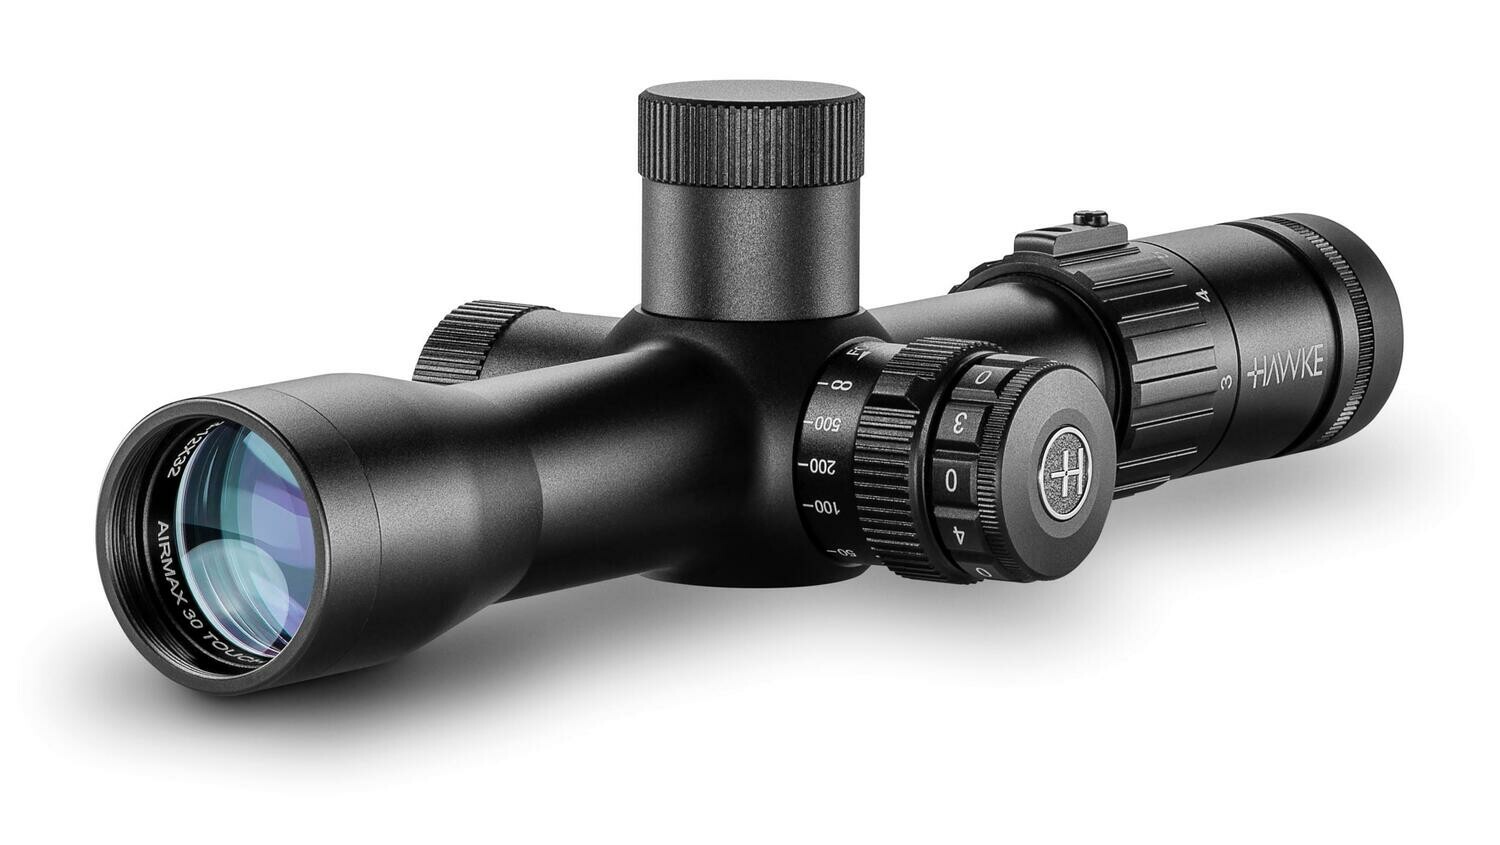 Hawke Airmax 30 Touch 3-12x32, Reticle: AMX IR Reticle